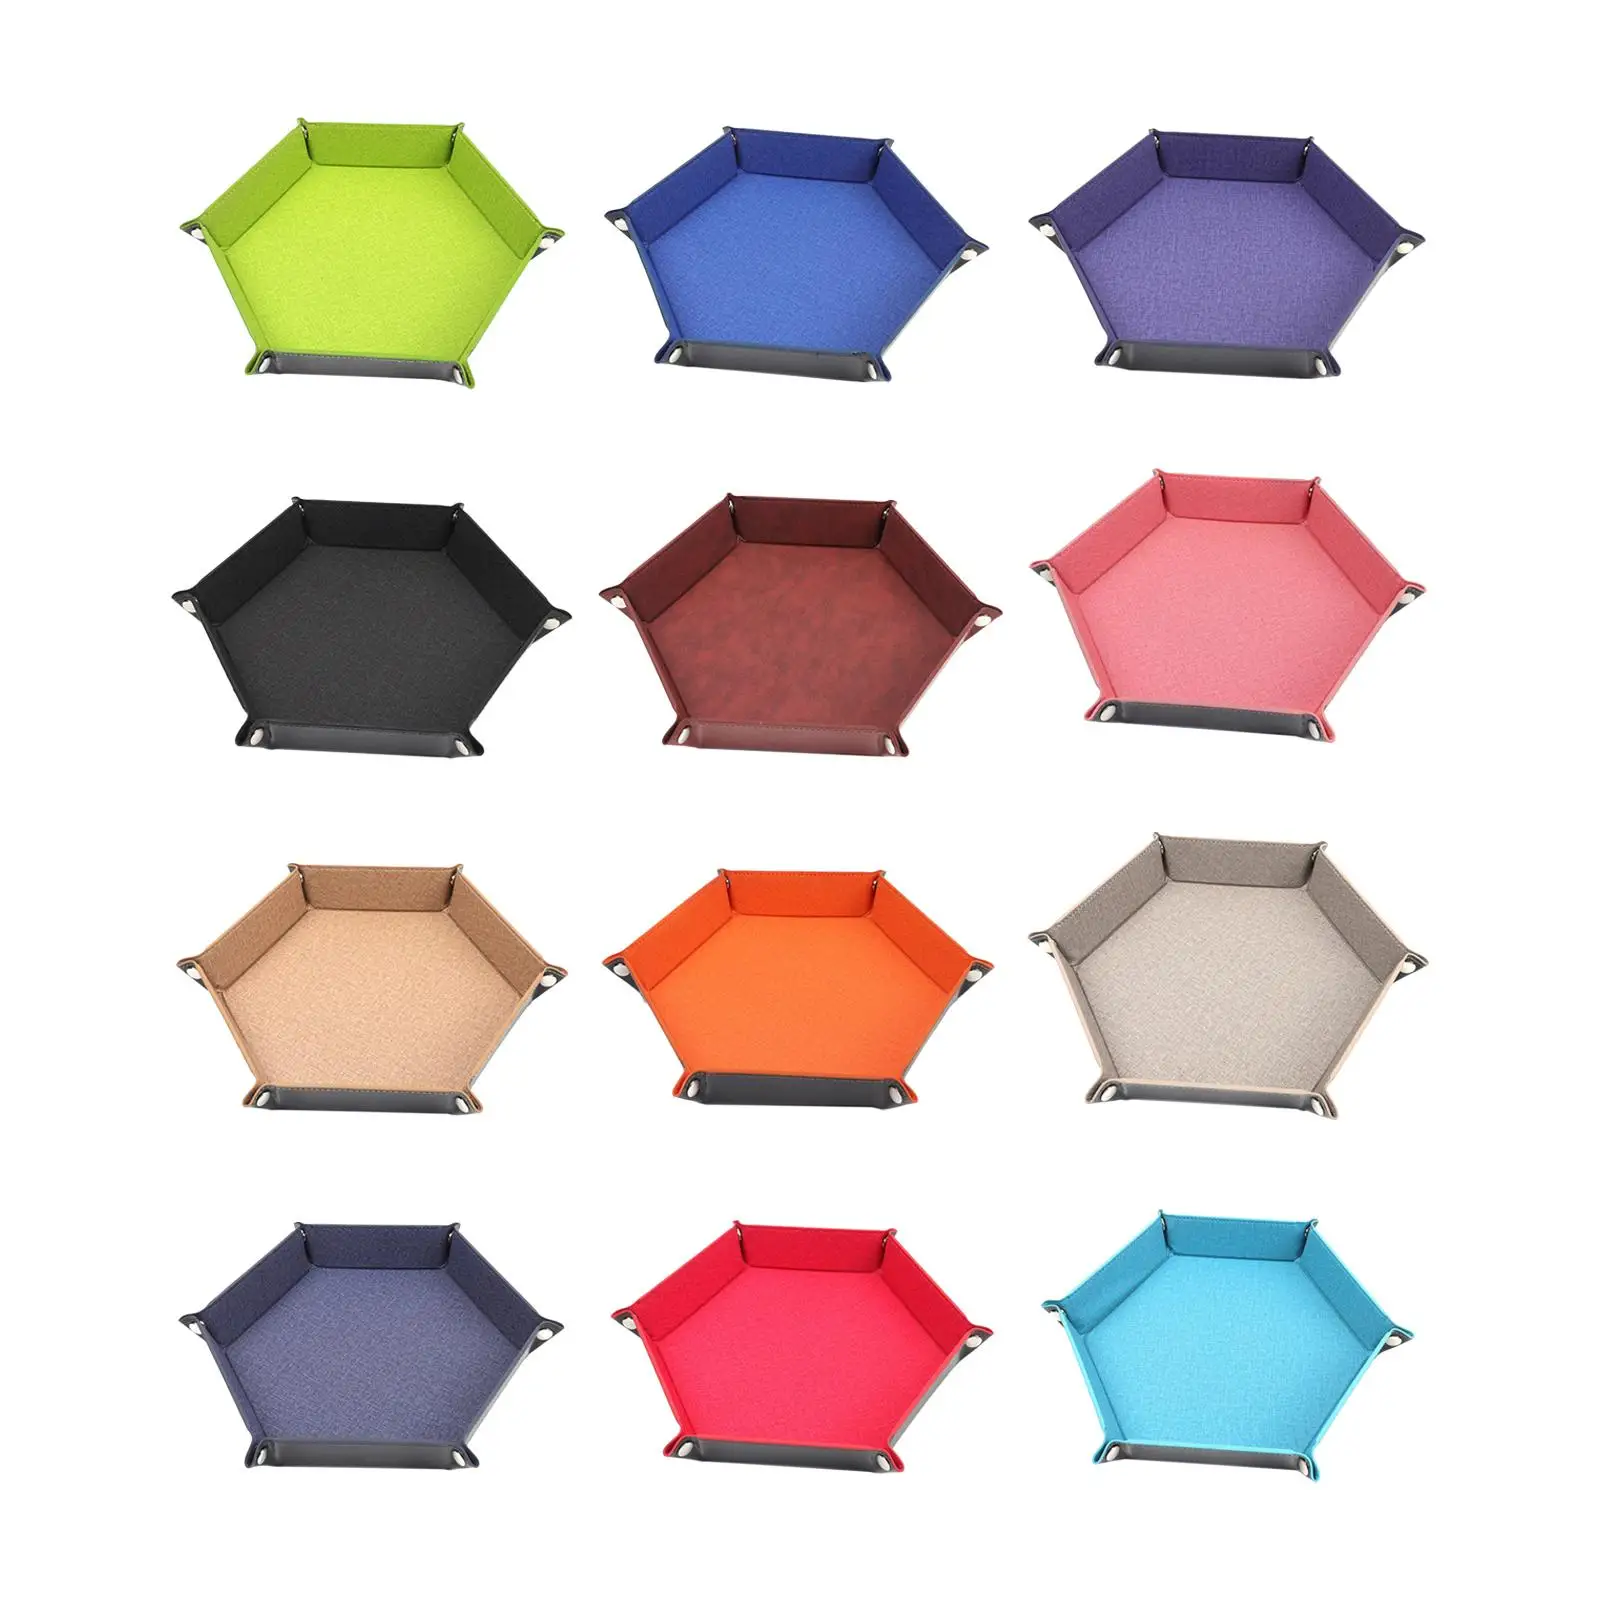 Hexagonal Dice Tray Double Sided Portable PU Leather Velvet Folding Dice Rolling Tray for Earbuds Table Games Jewelry Candies